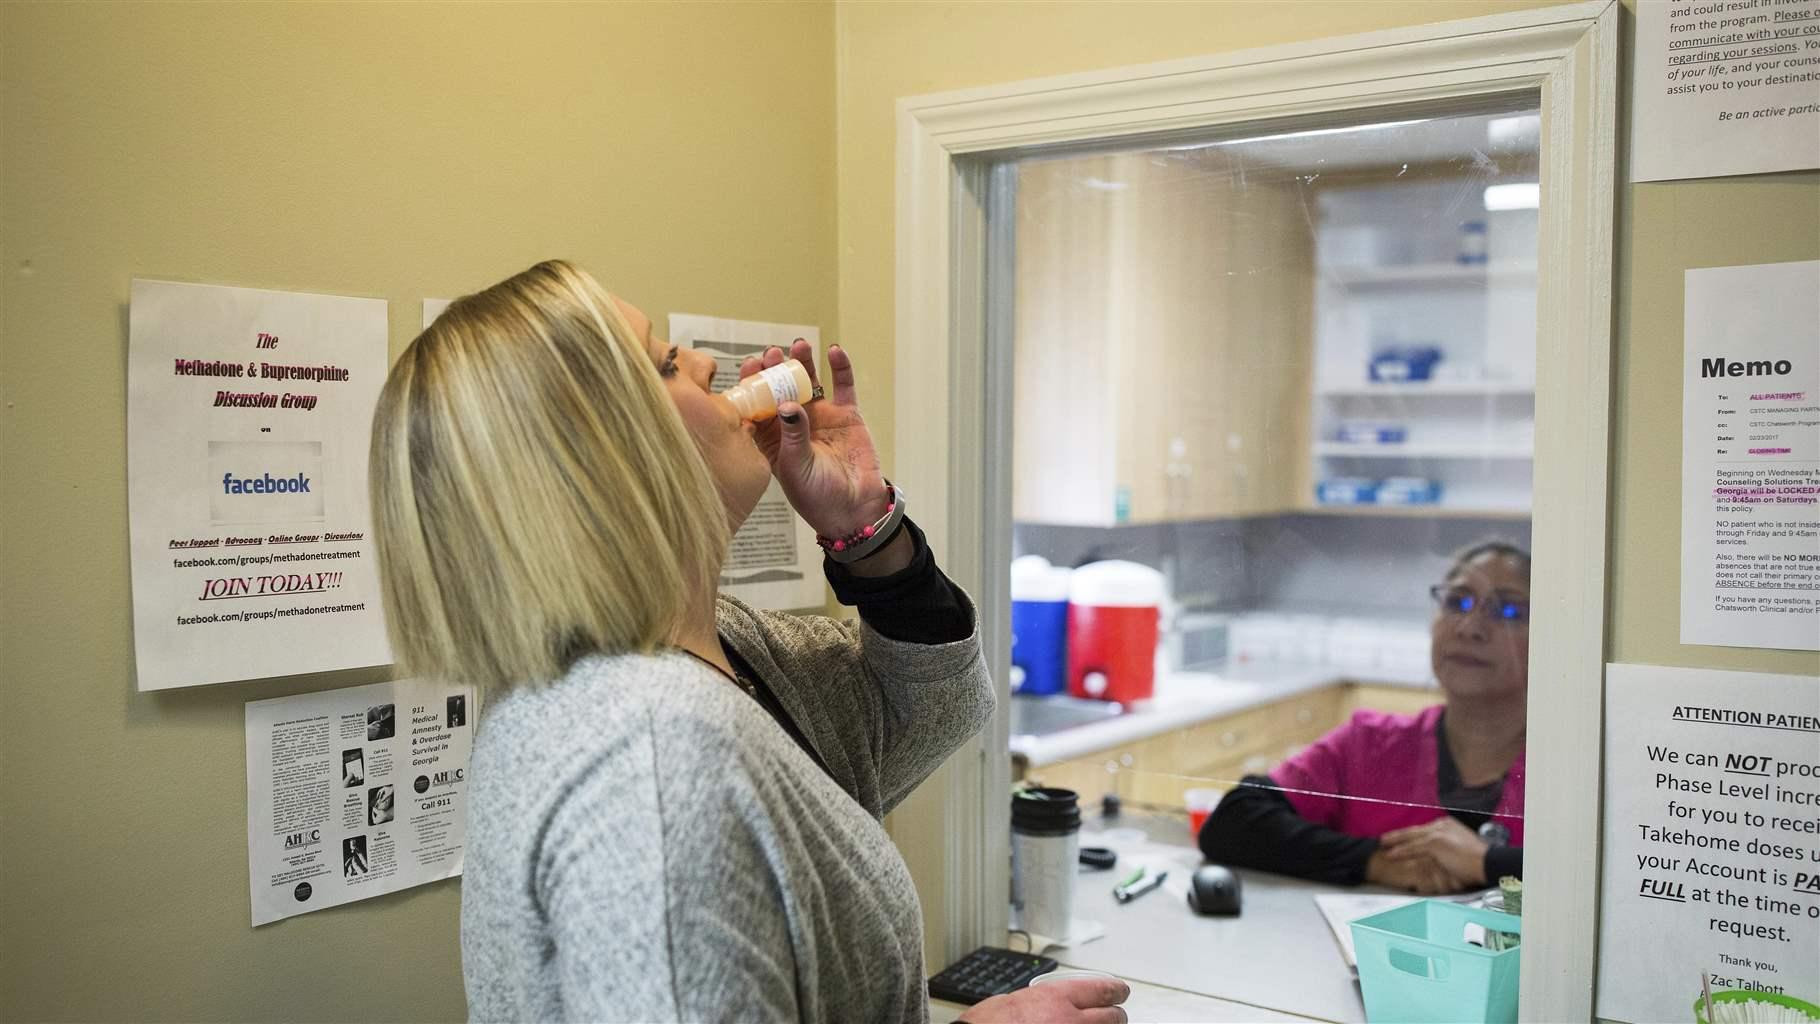 In this March 8, 2017 photo, Ashley Gardner, 34, takes a dose of methadone at Counseling Solutions of Chatsworth, Ga. Gardner, 34-year-old woman said her addiction started in the seventh grade when she wanted to numb the pain after she was sexually assaulted.